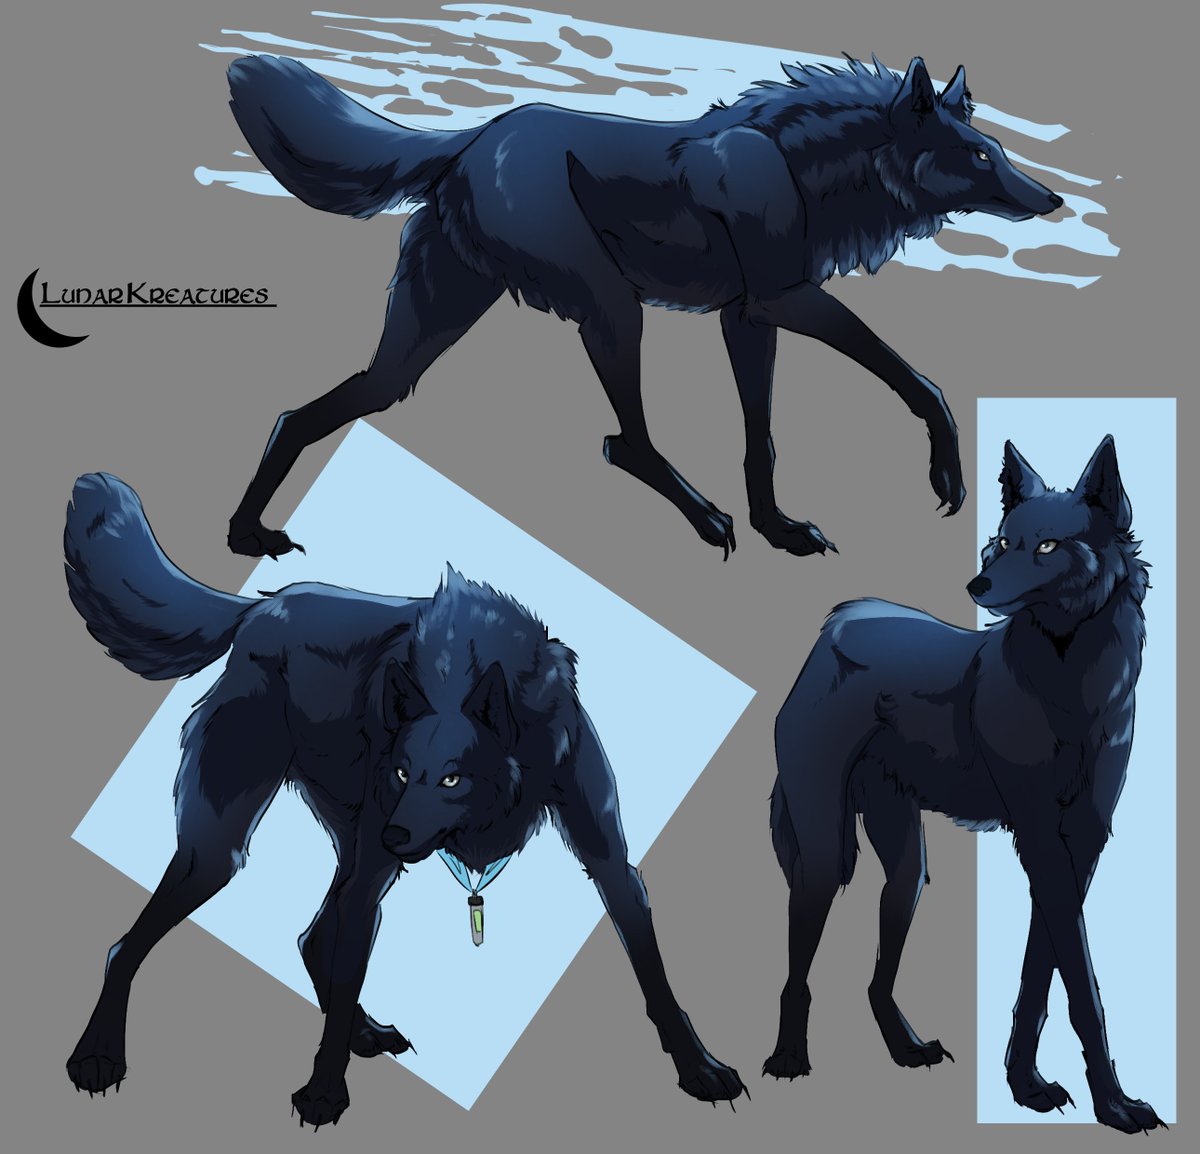 finished these! makoto in wolf form for one of mine werewolf aus. even being all leg he is still short in wolf form too compared to others like in this au kotone exists and she is bigger than him in wolf form XD #makotoyuki #werewolf #persona3 #wolf #minatoarisato #persona